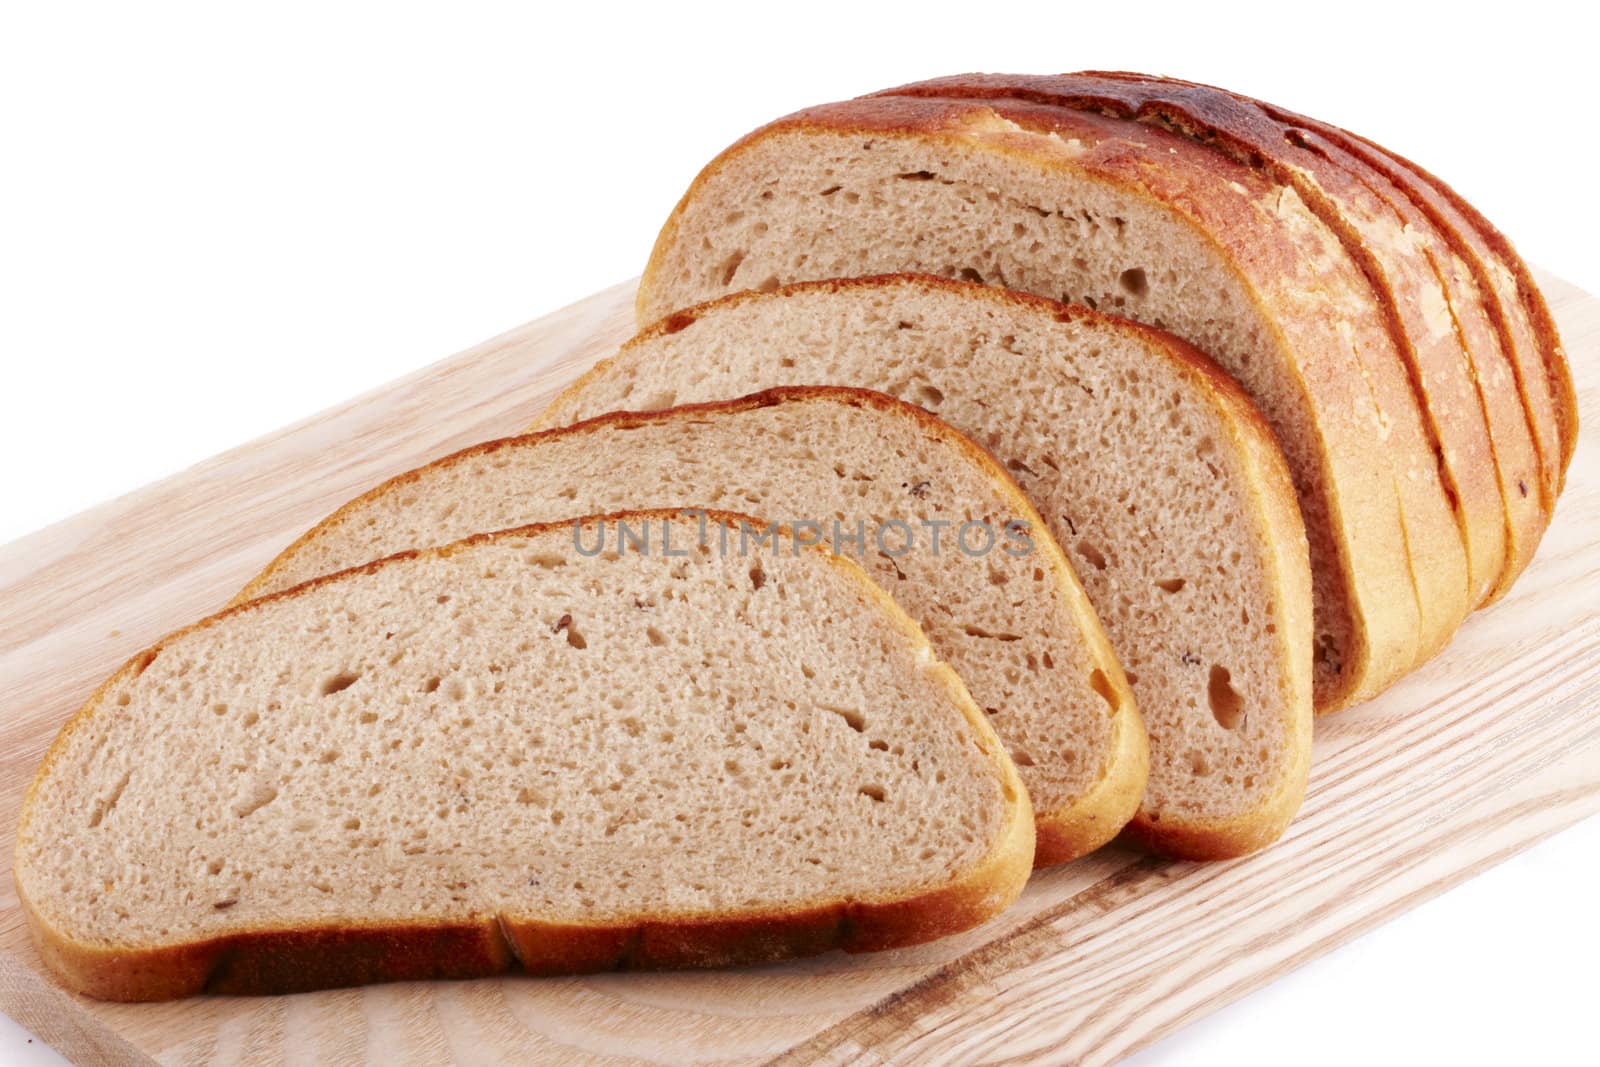 Delicious, fresh, home-made whole wheat bread.